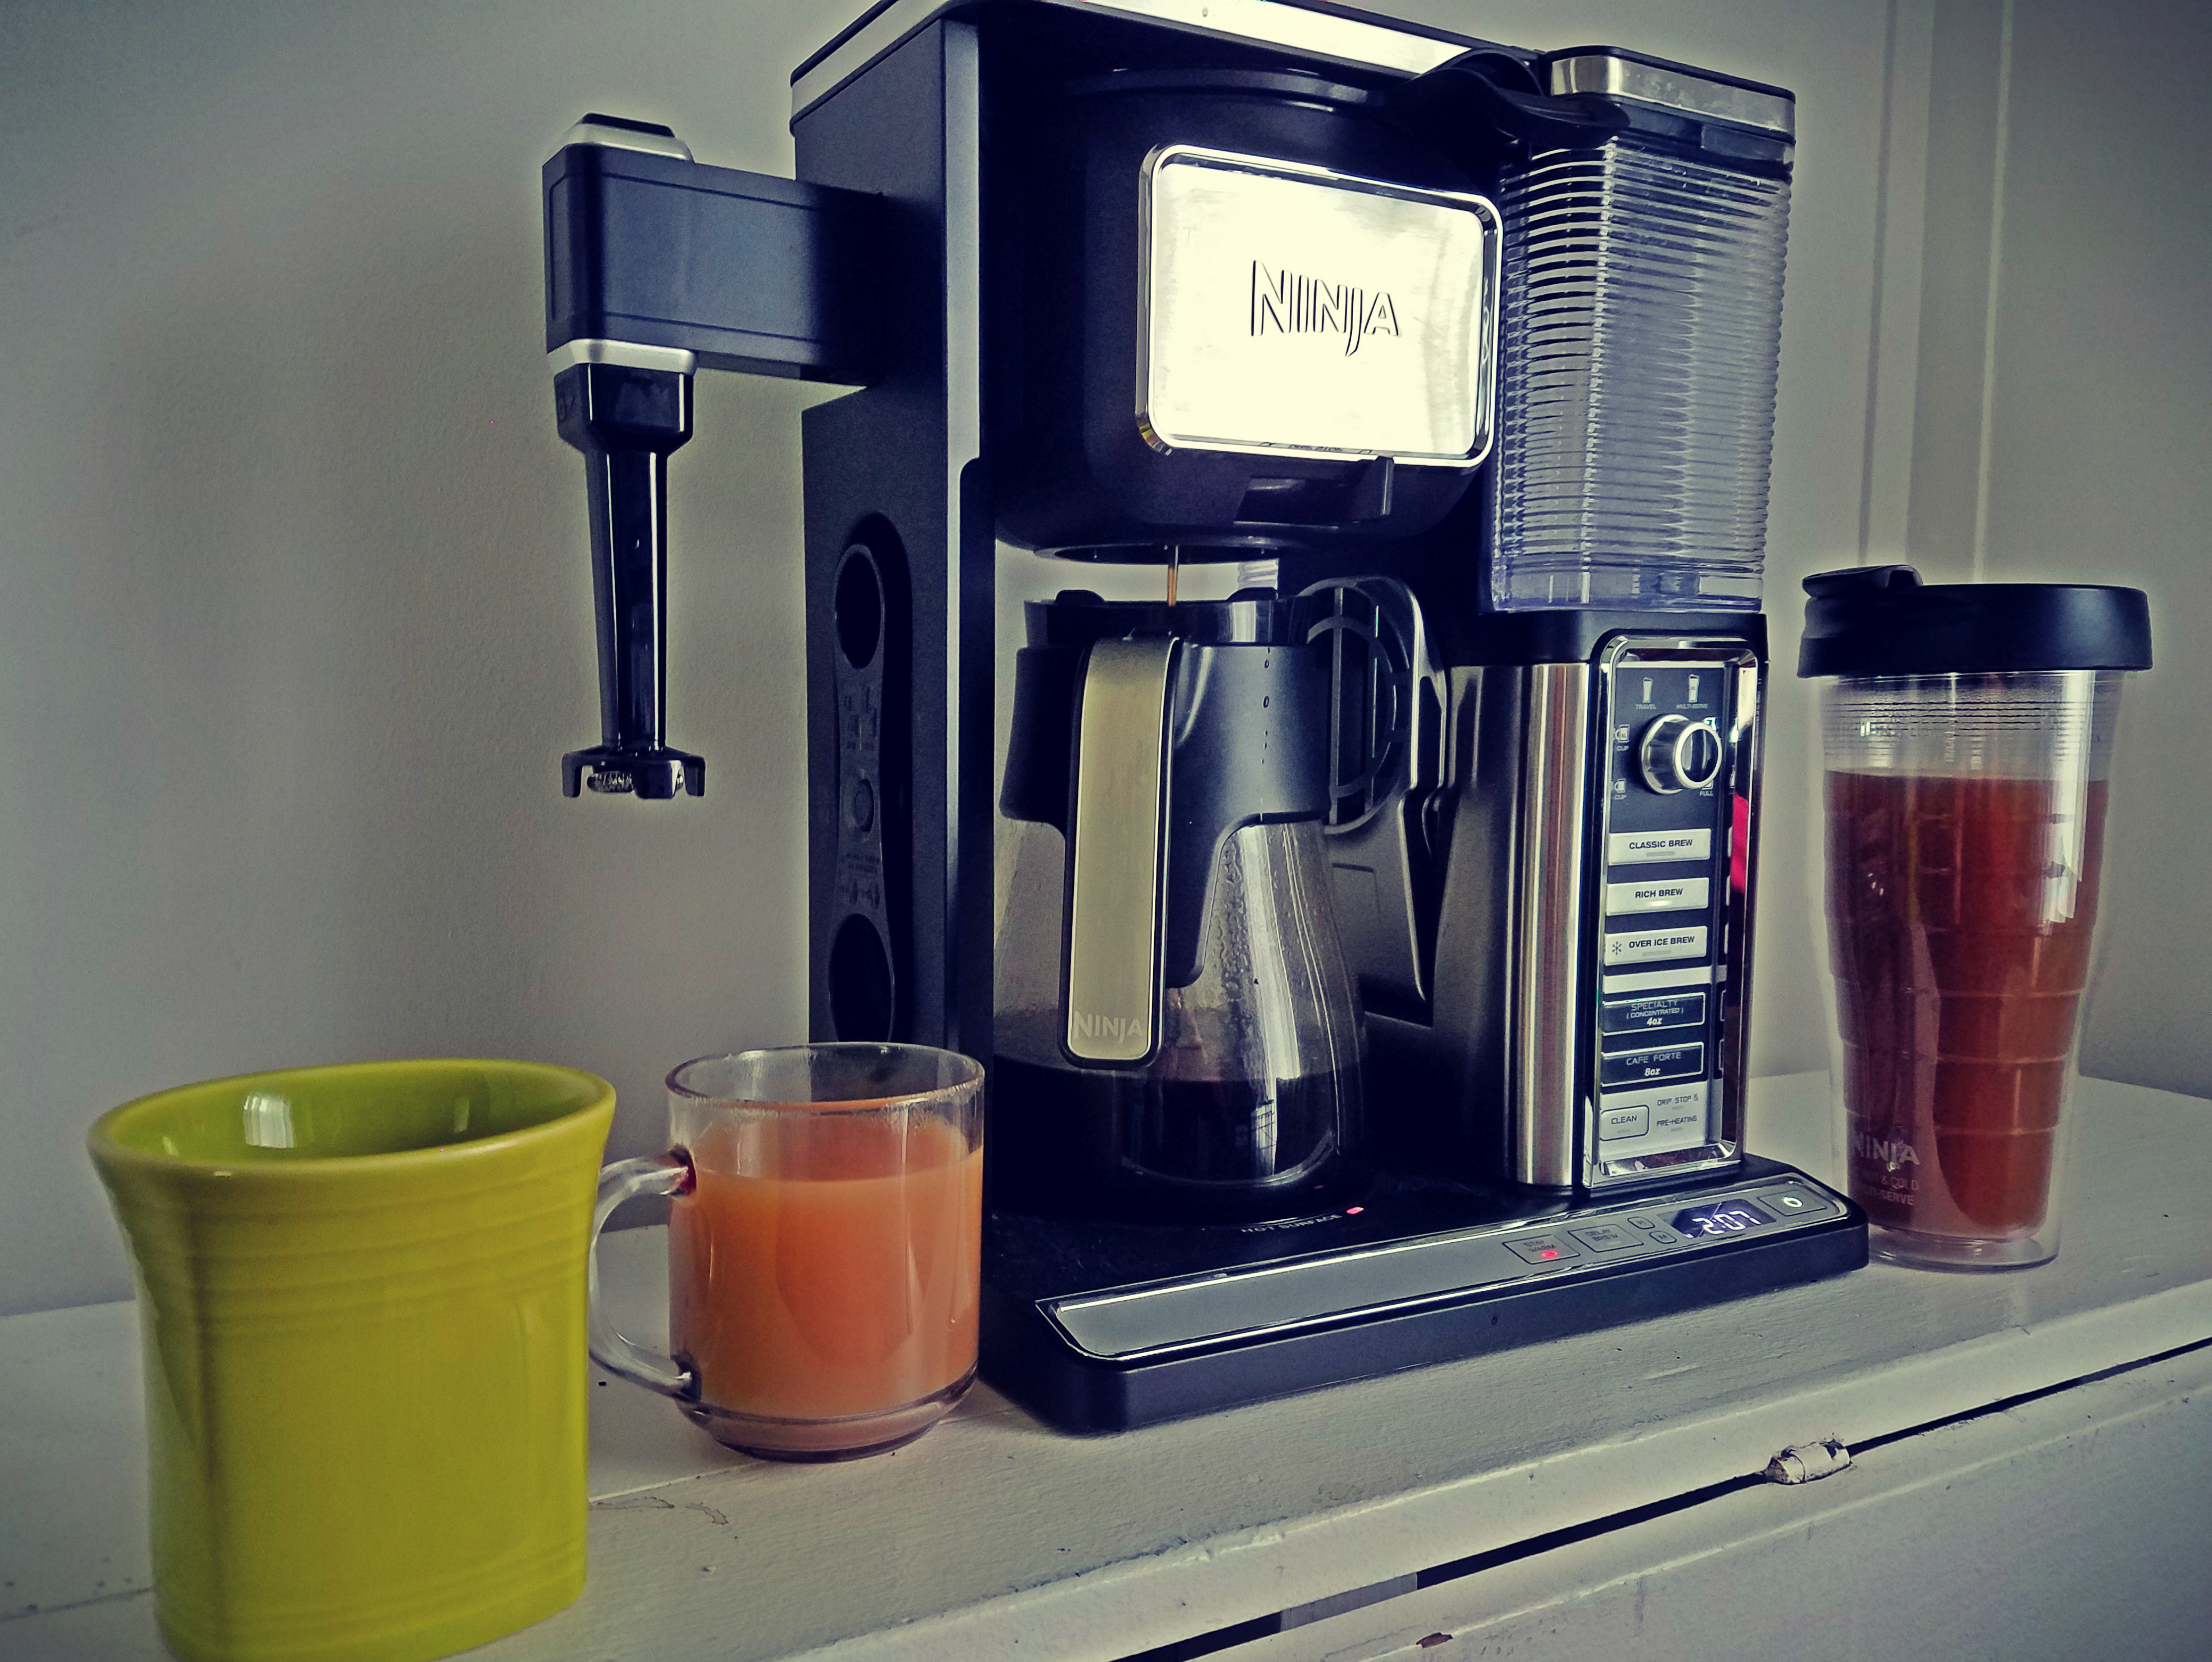 Our review of the Ninja Coffee Bar brewer.